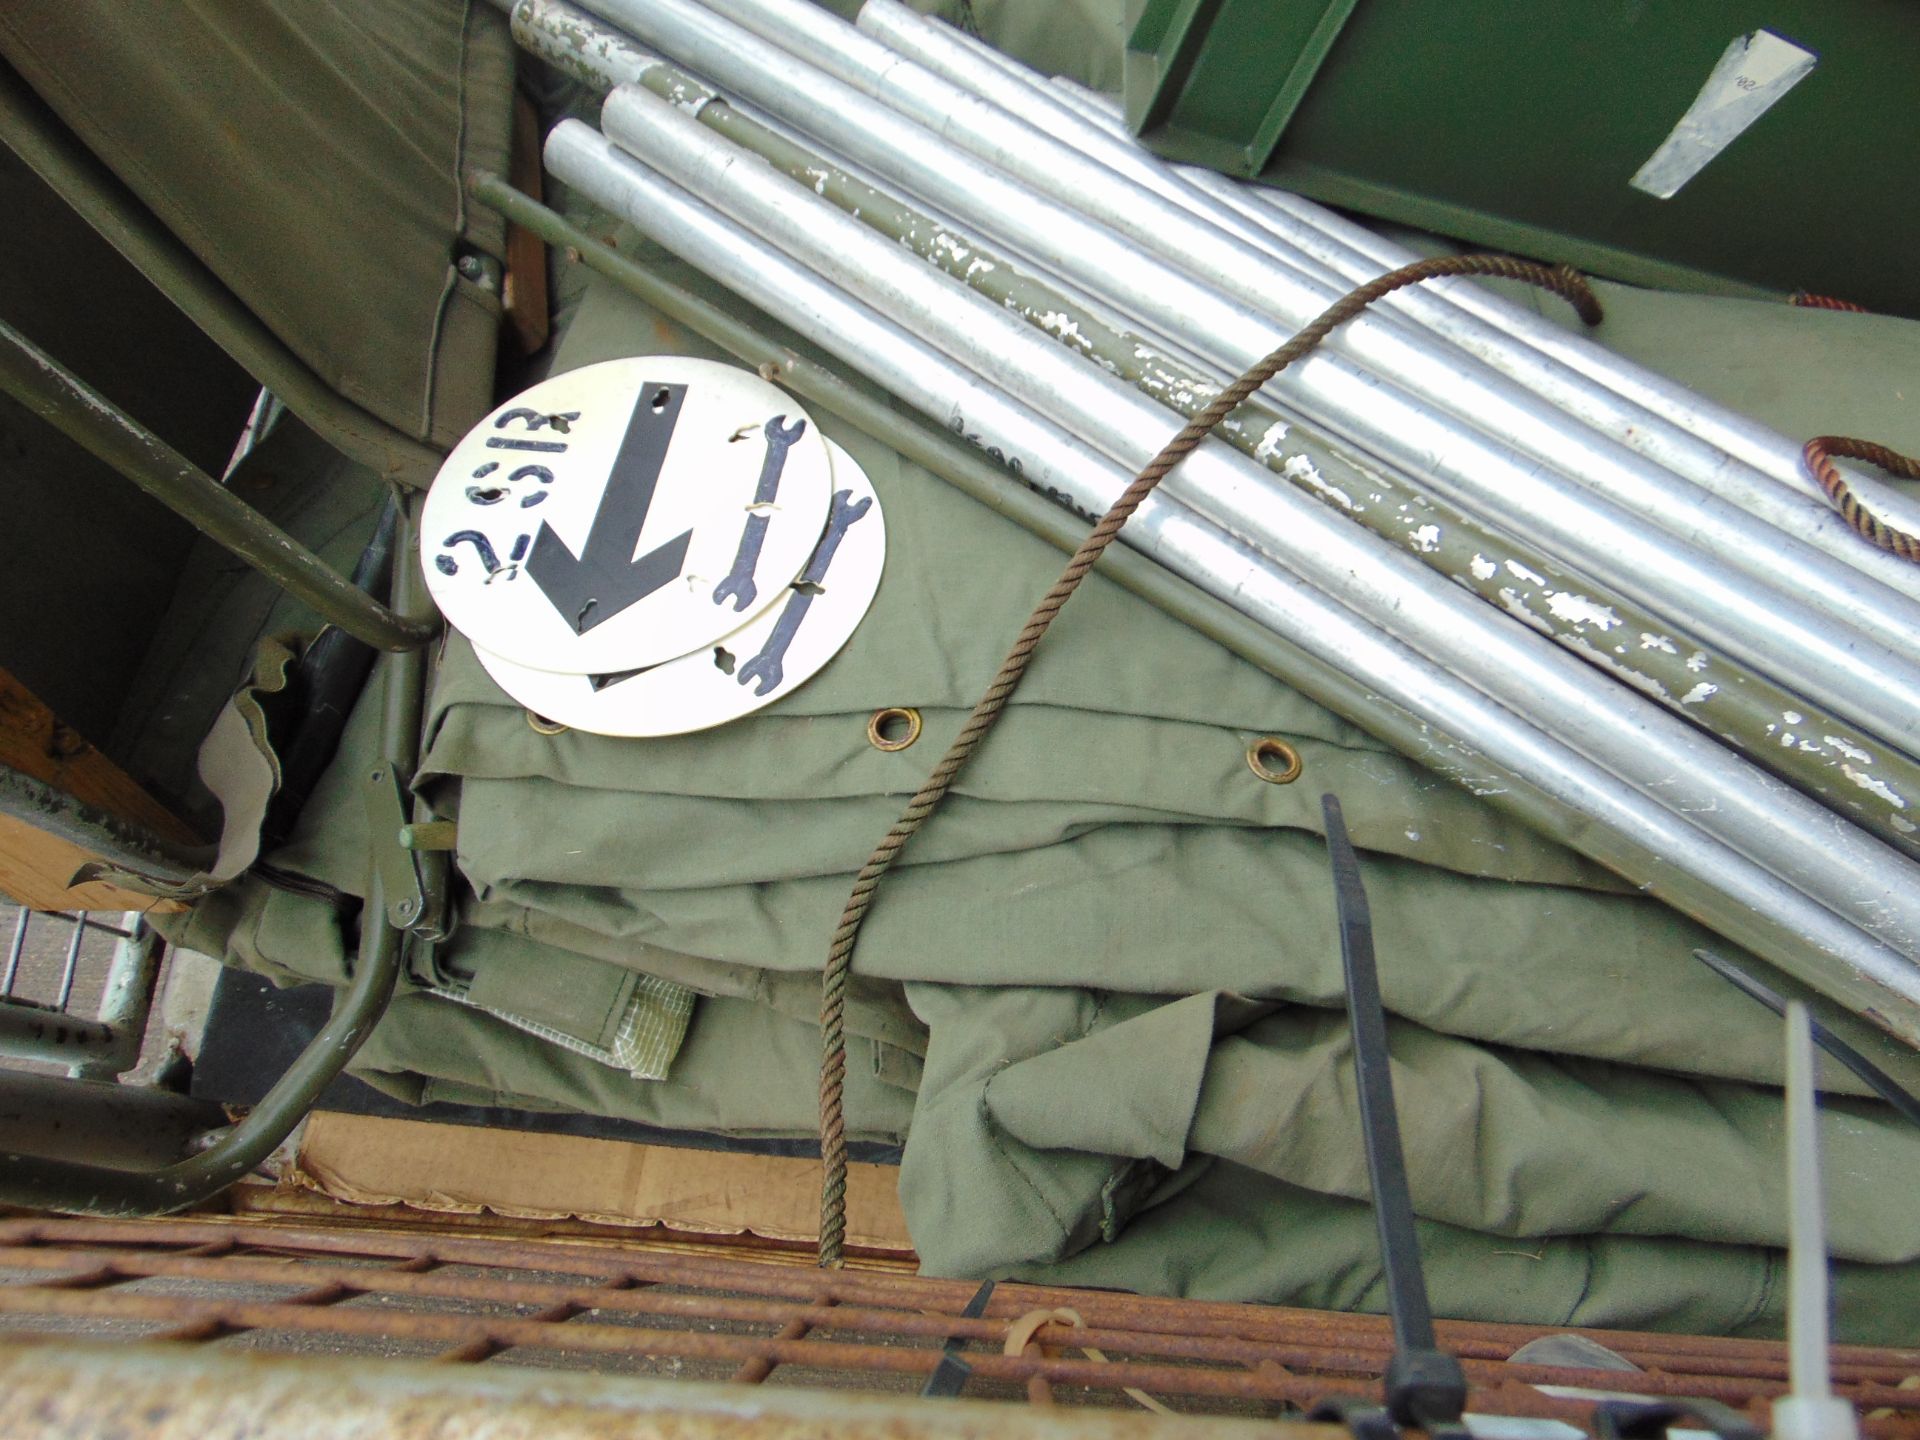 1 x Stillage Containing Shelter/Tent with poles fittings Etc - Image 3 of 6